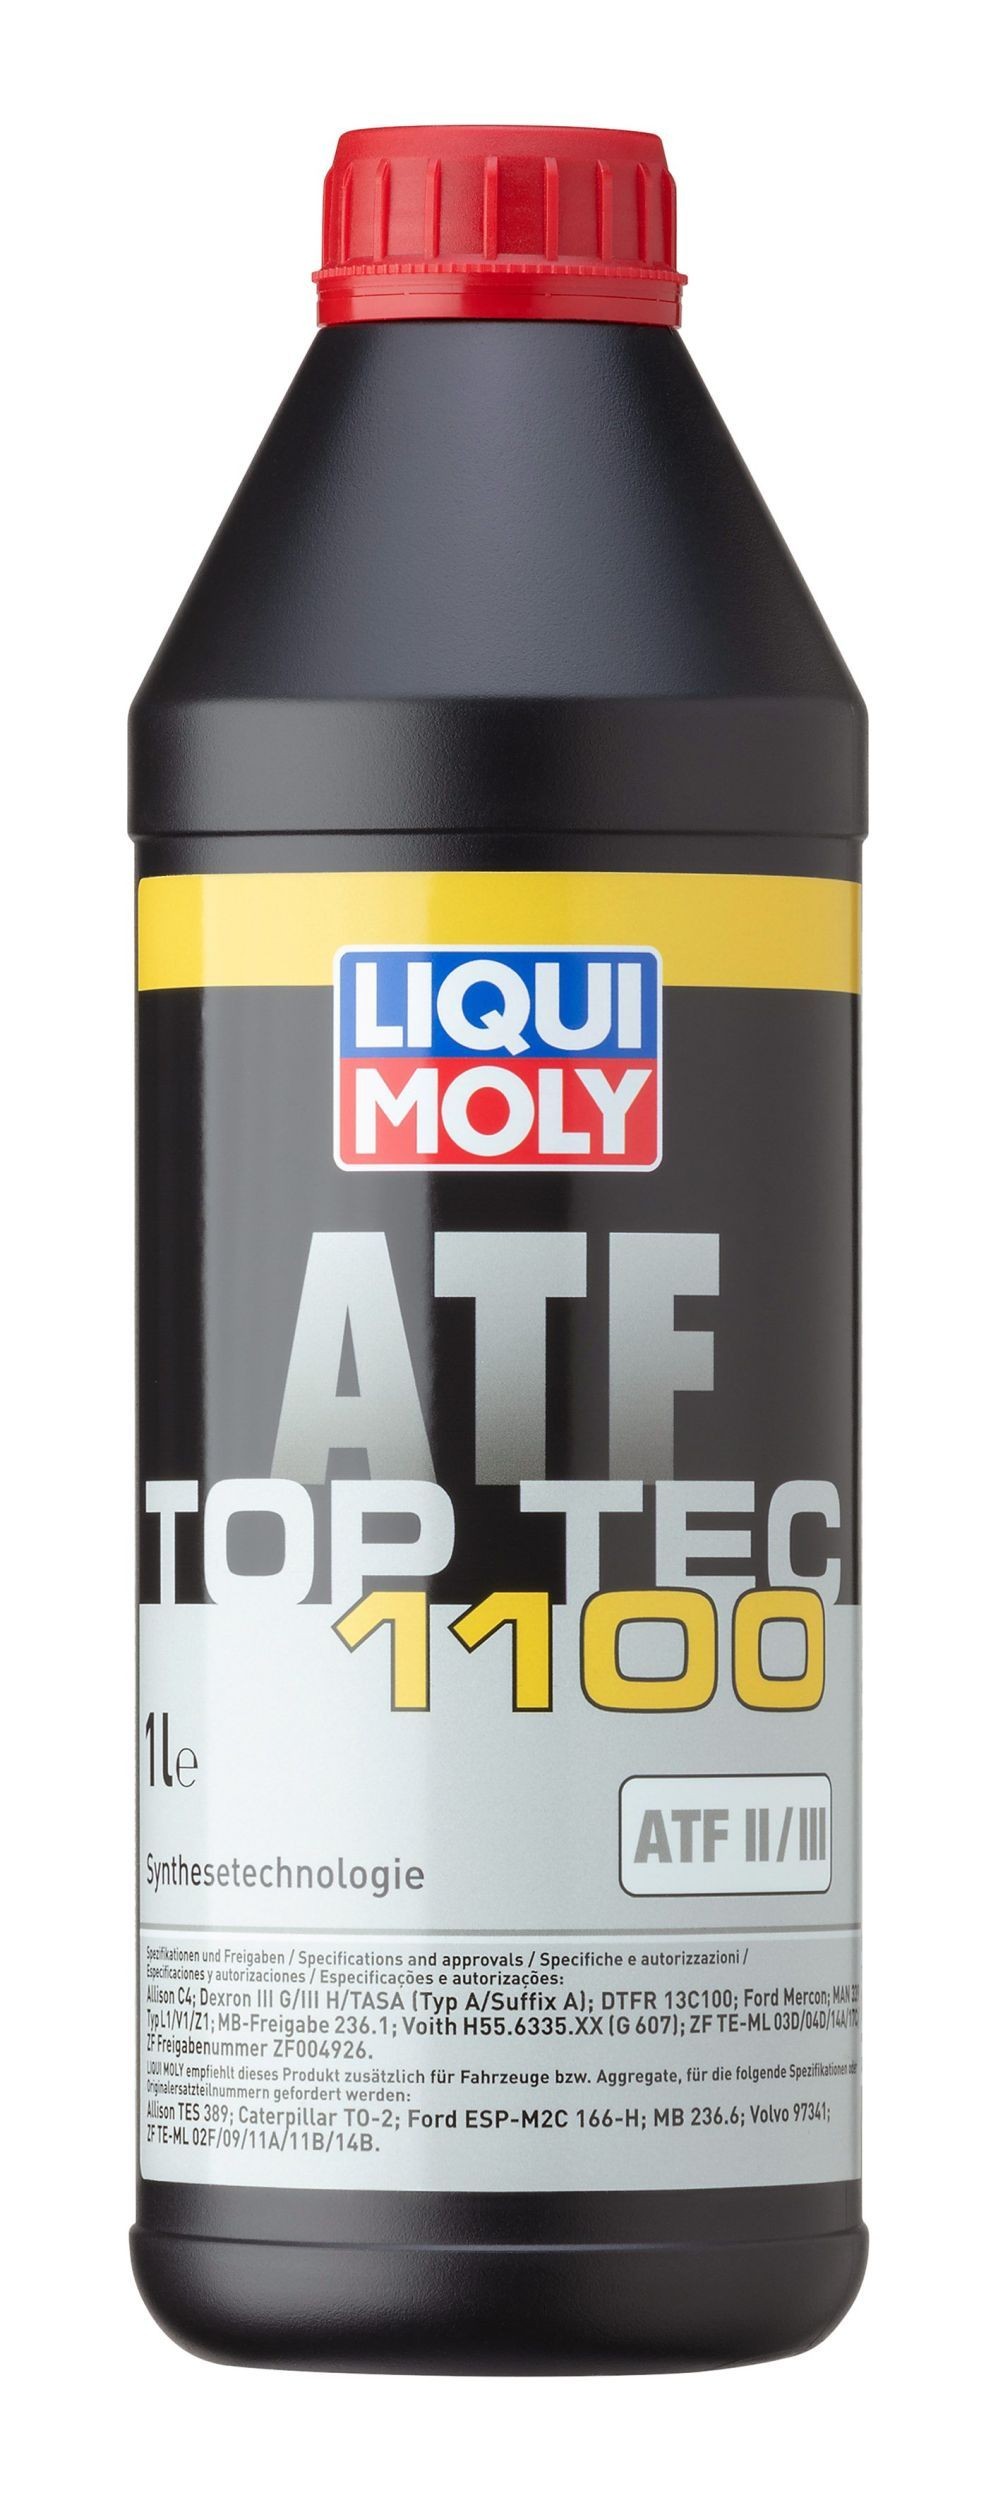 LIQUI MOLY Top Tec ATF, 1100 ATF III, 1l, red Automatic transmission oil 3651 buy